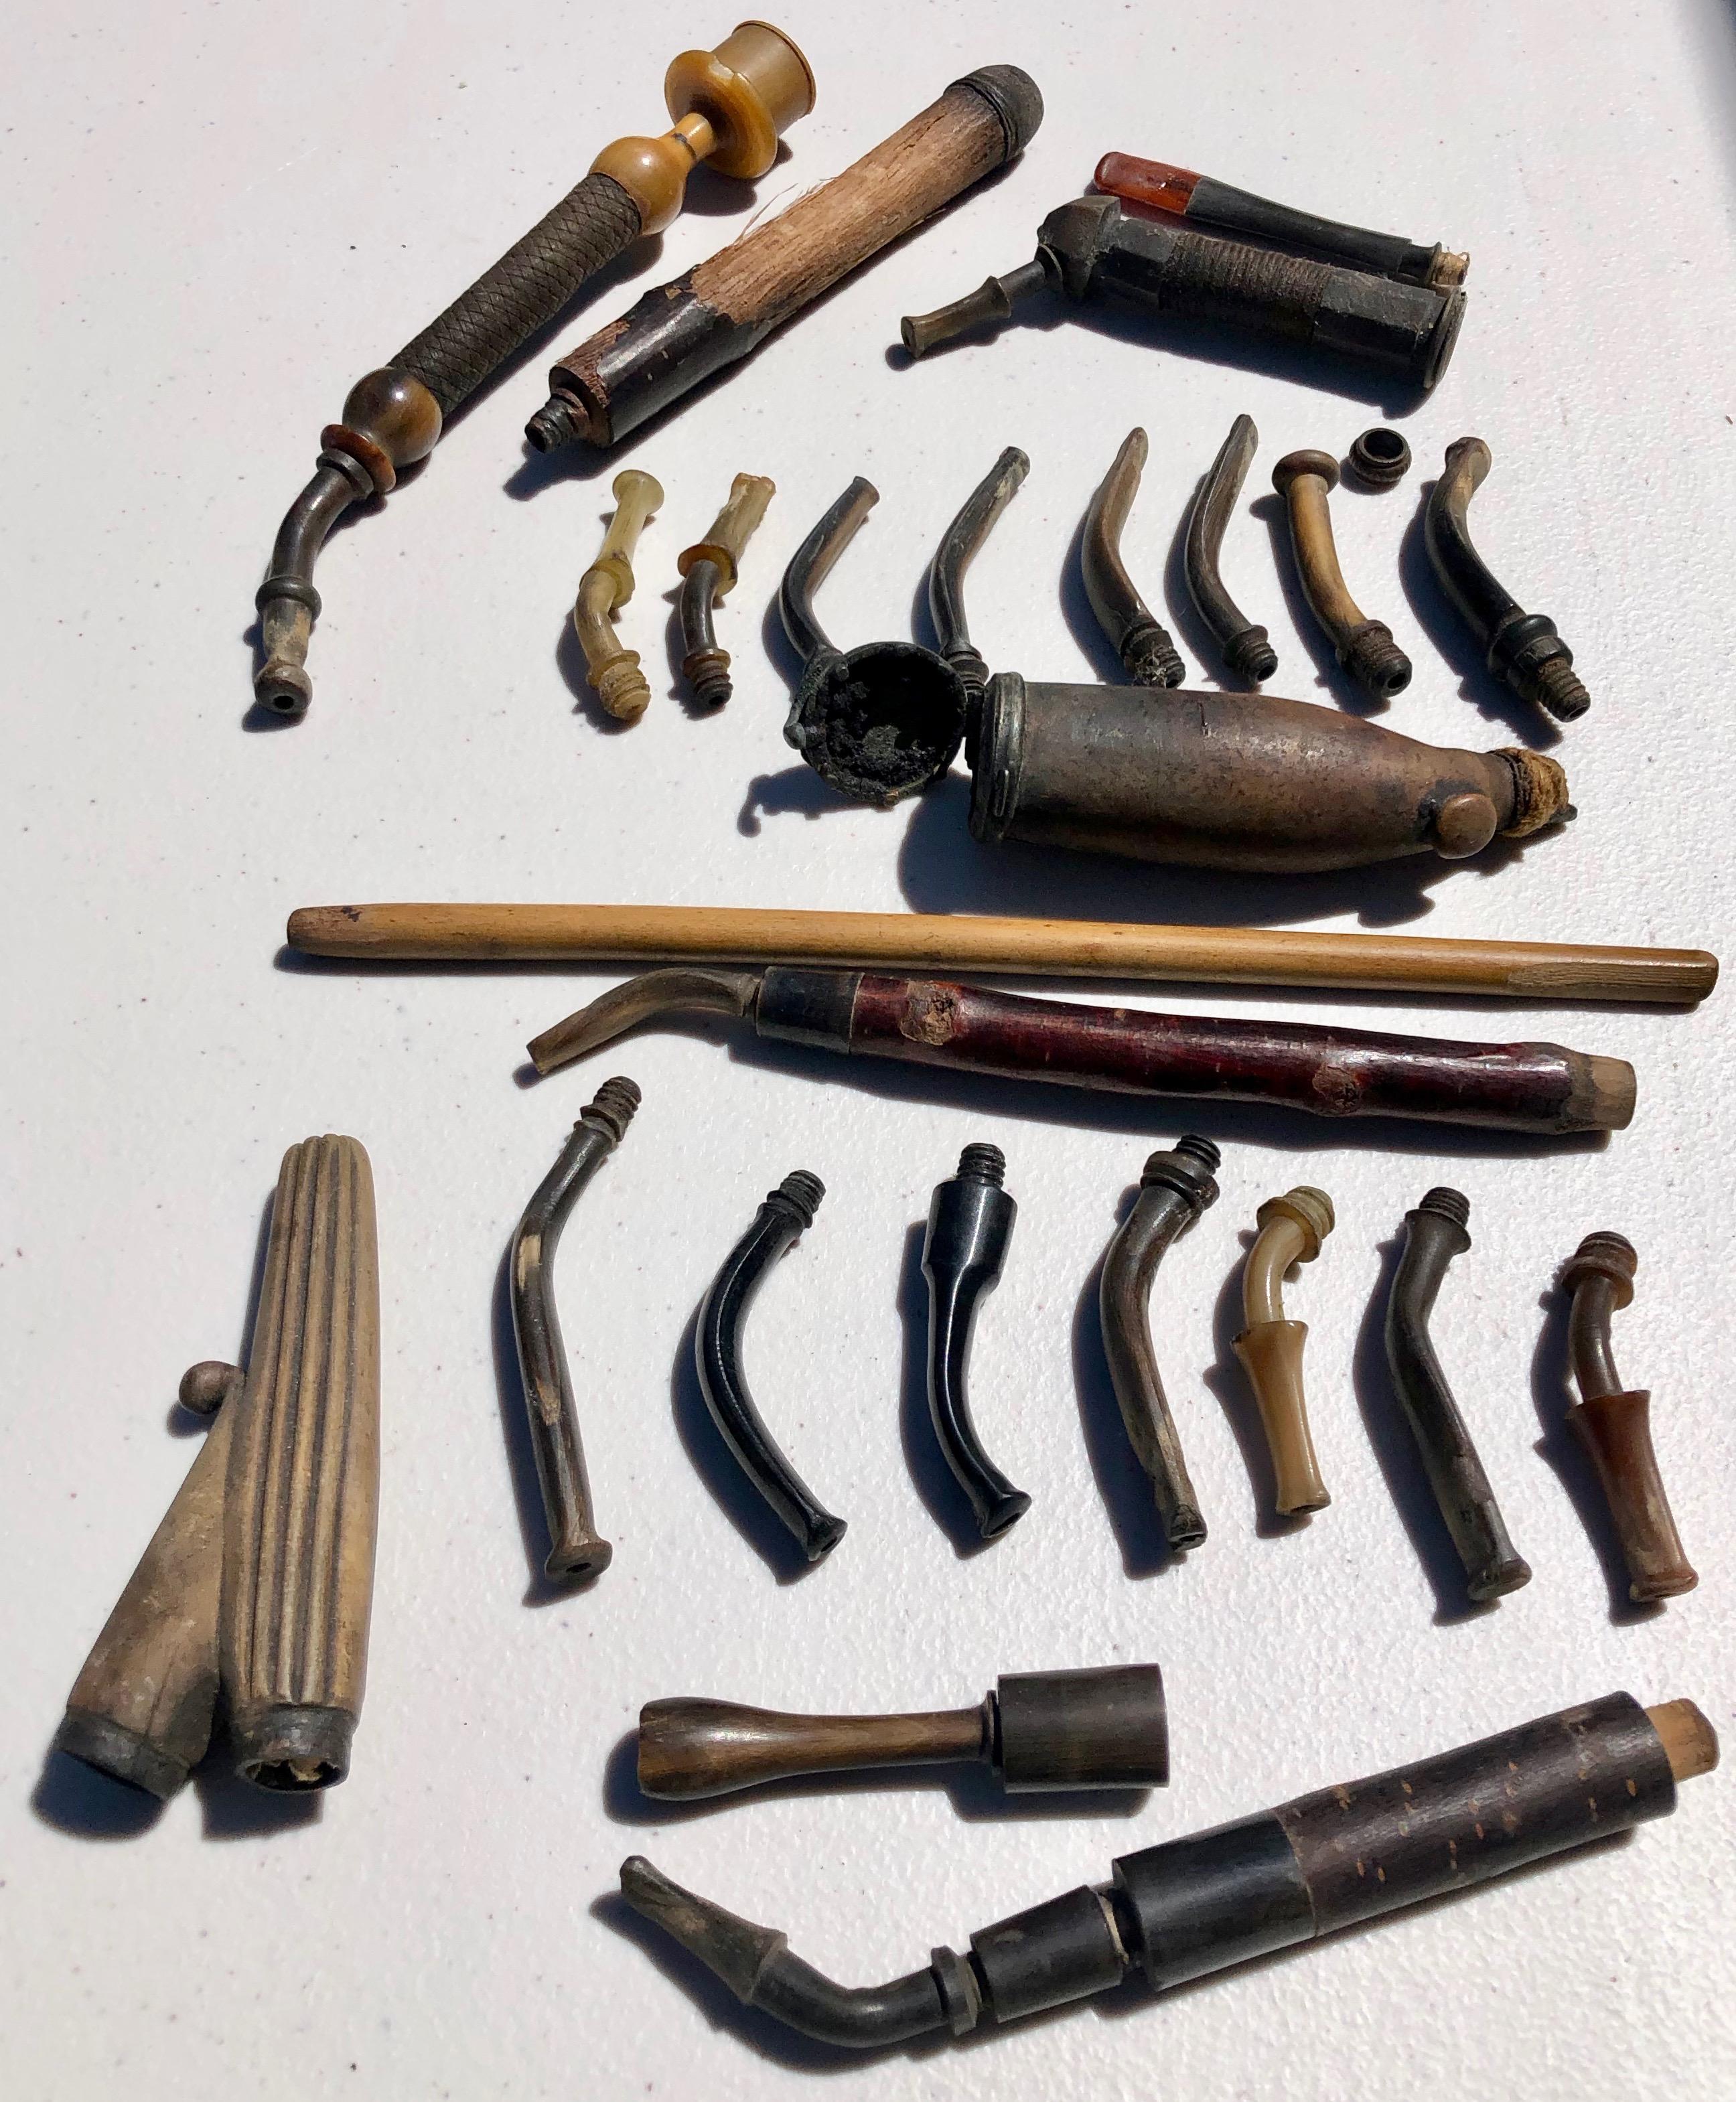 This is a collection of a variety of old pipe pieces all listed below. Framed together as a collection or used to replace needed pipe parts this is a fun collection.

Measures: 17 small mouth pieces 2-3